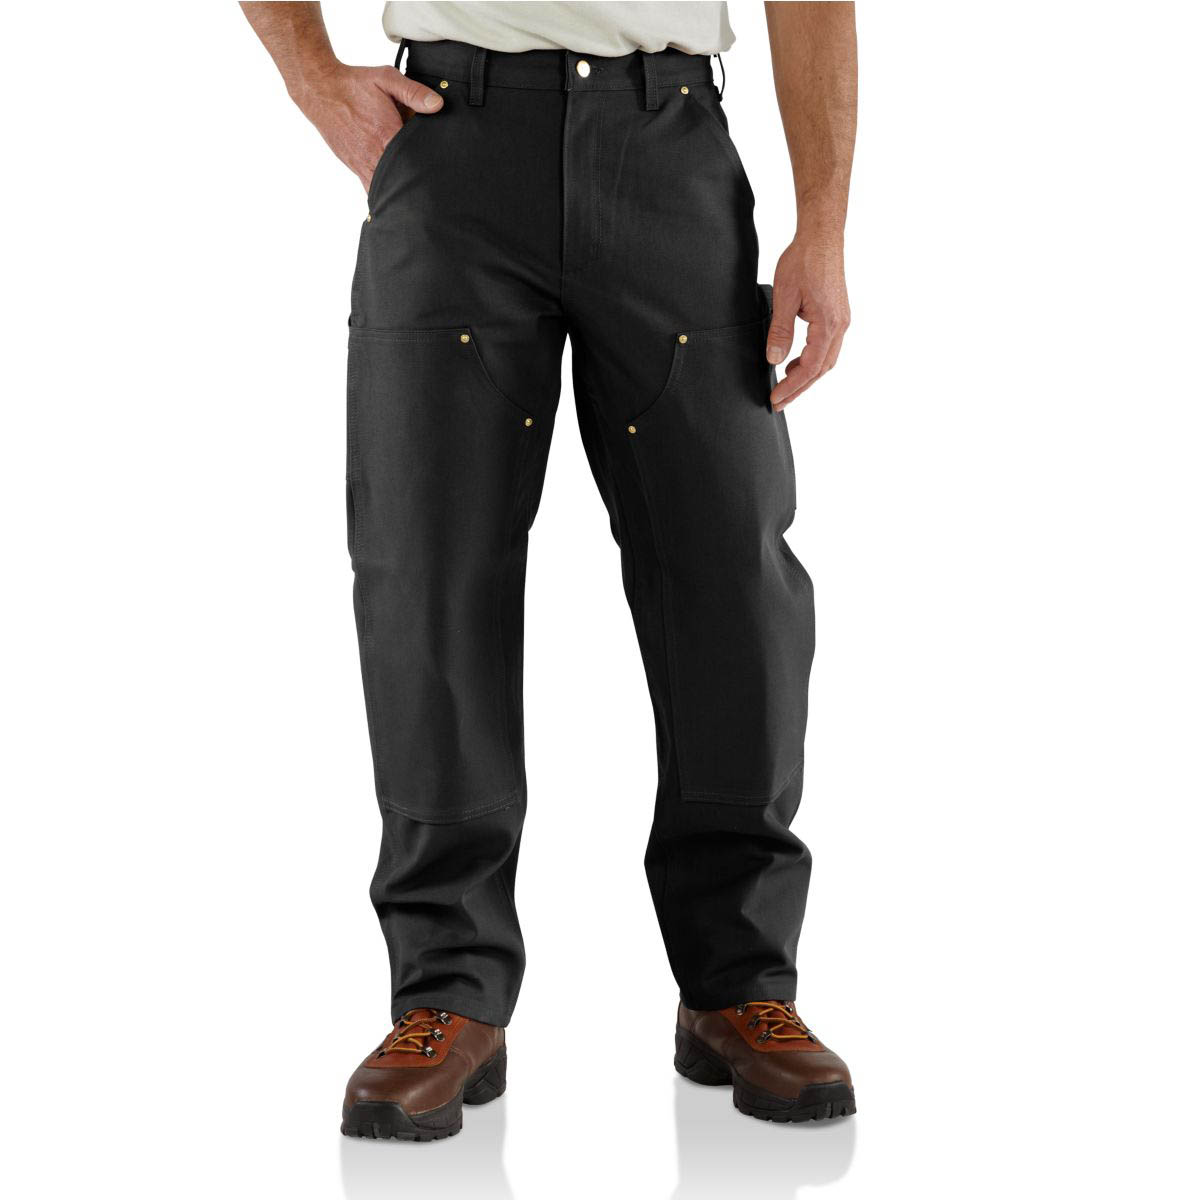 Flame-resistant pants from Dovetail Workwear made for female welders